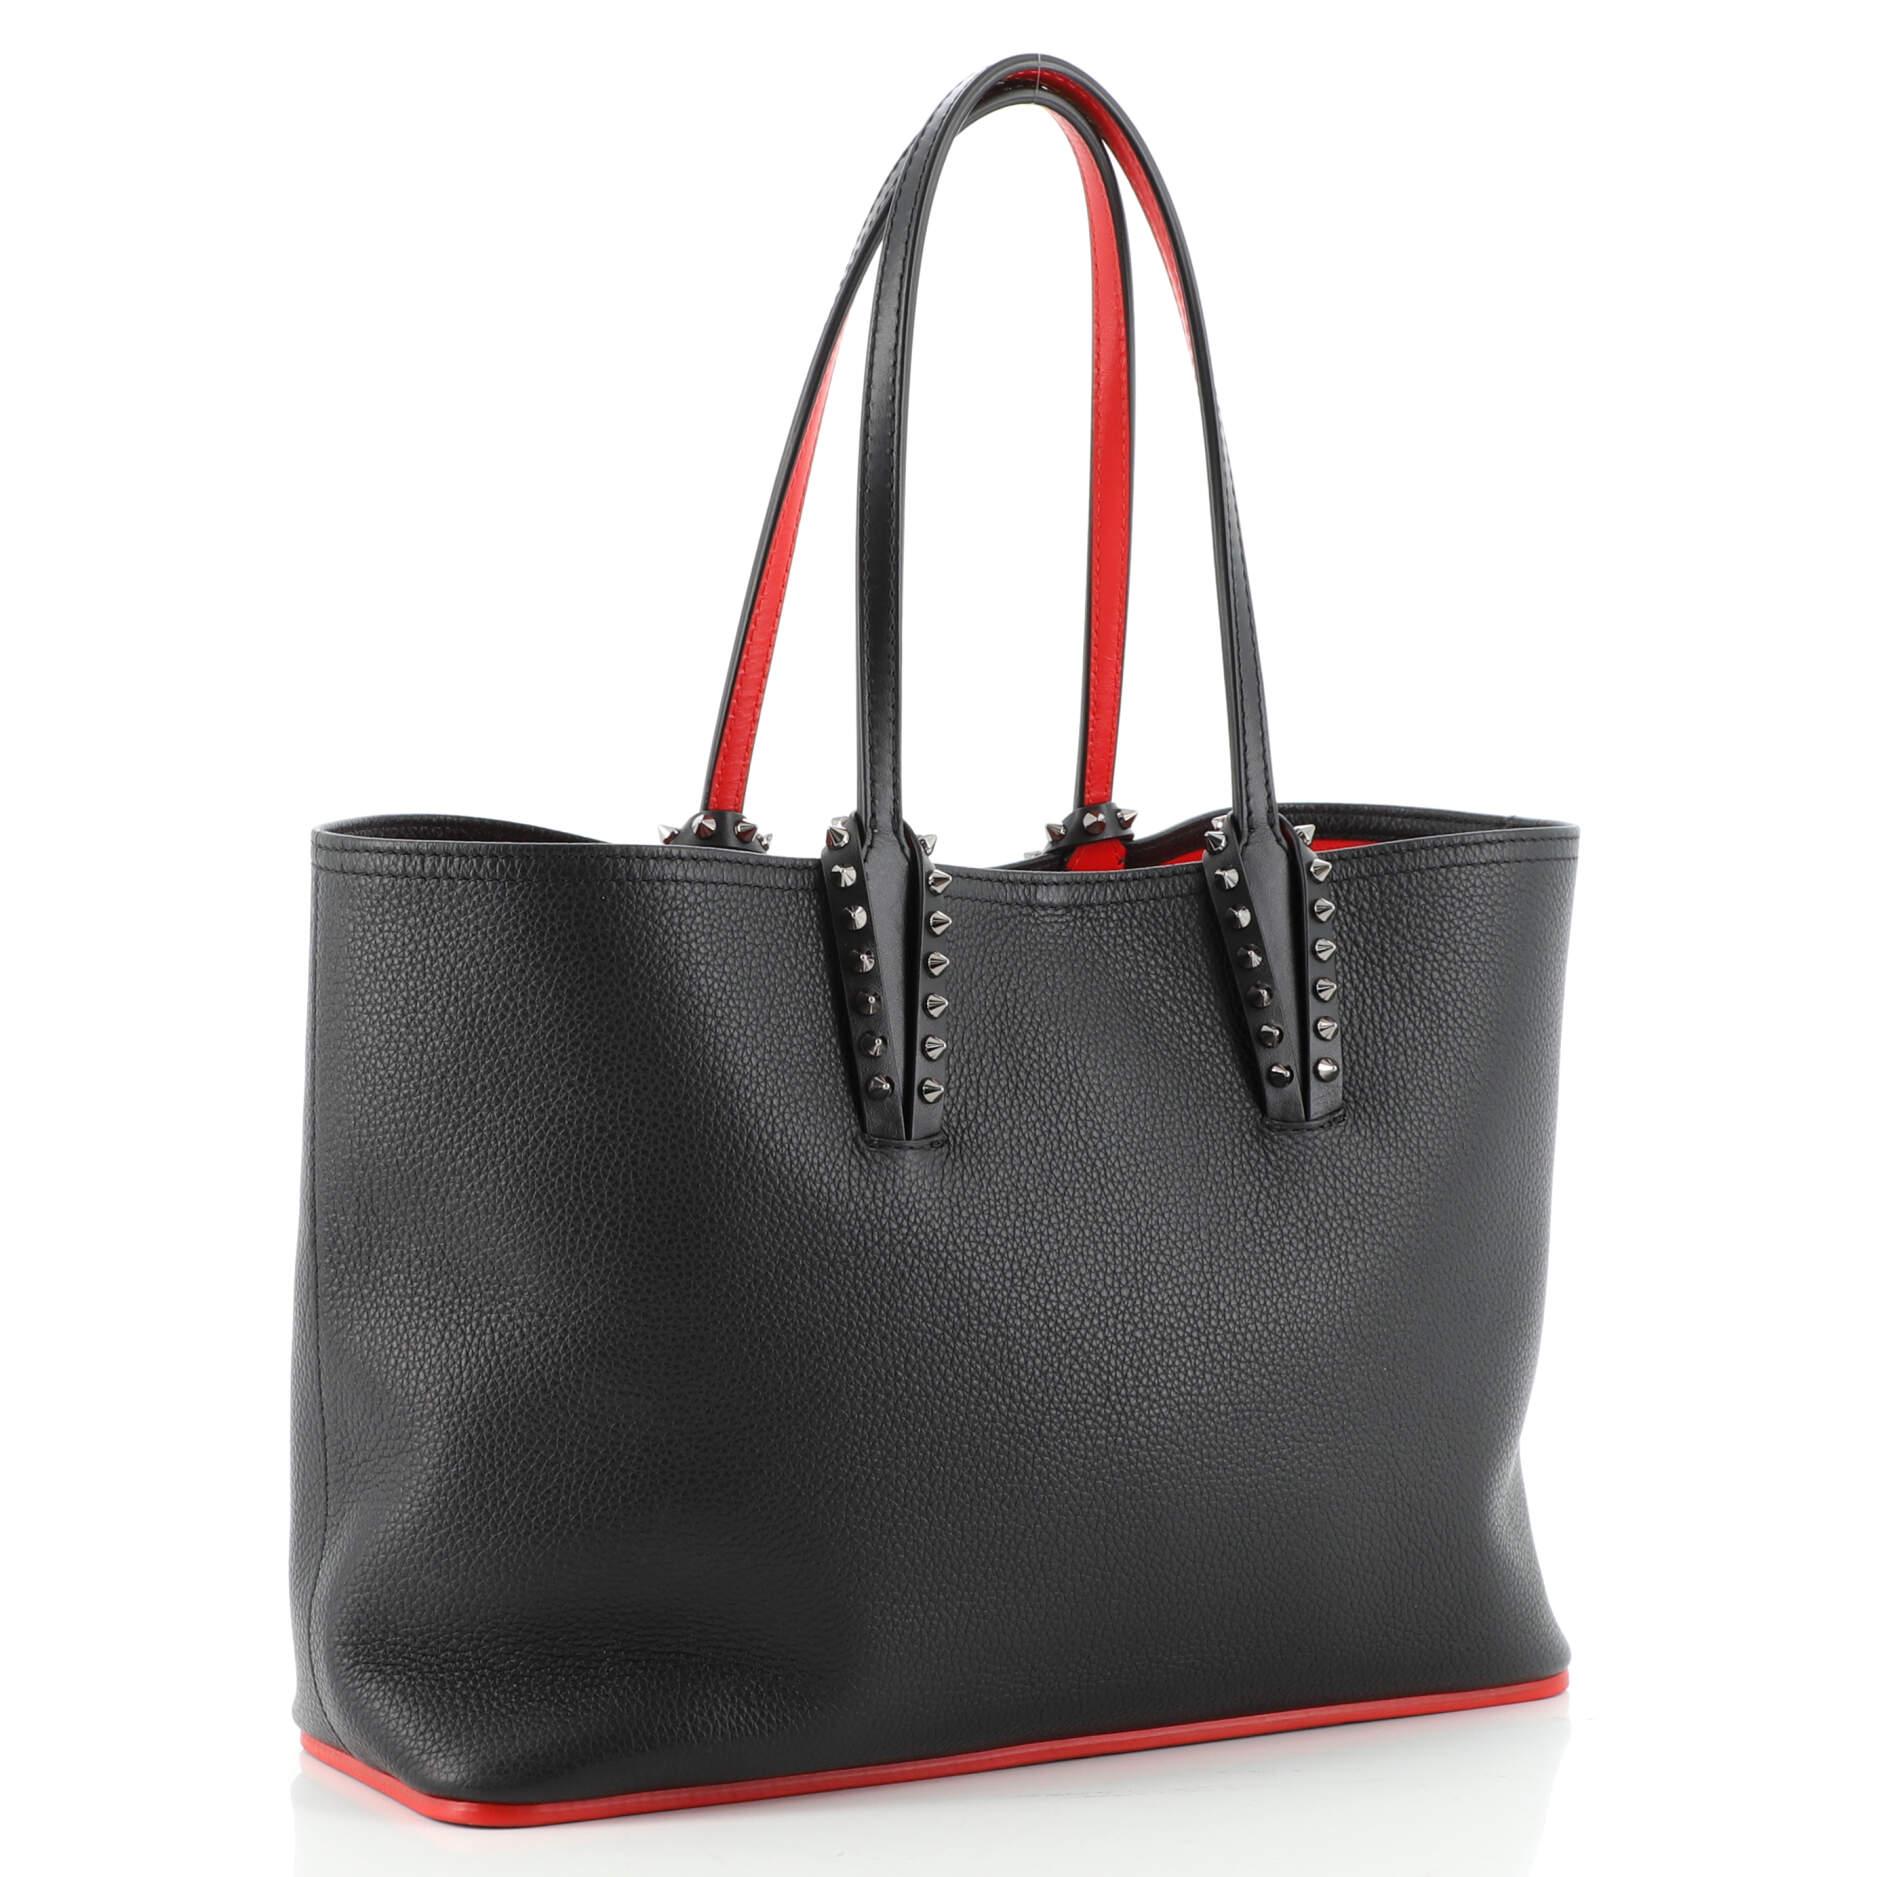 Black Christian Louboutin Cabata East West Tote Leather Small